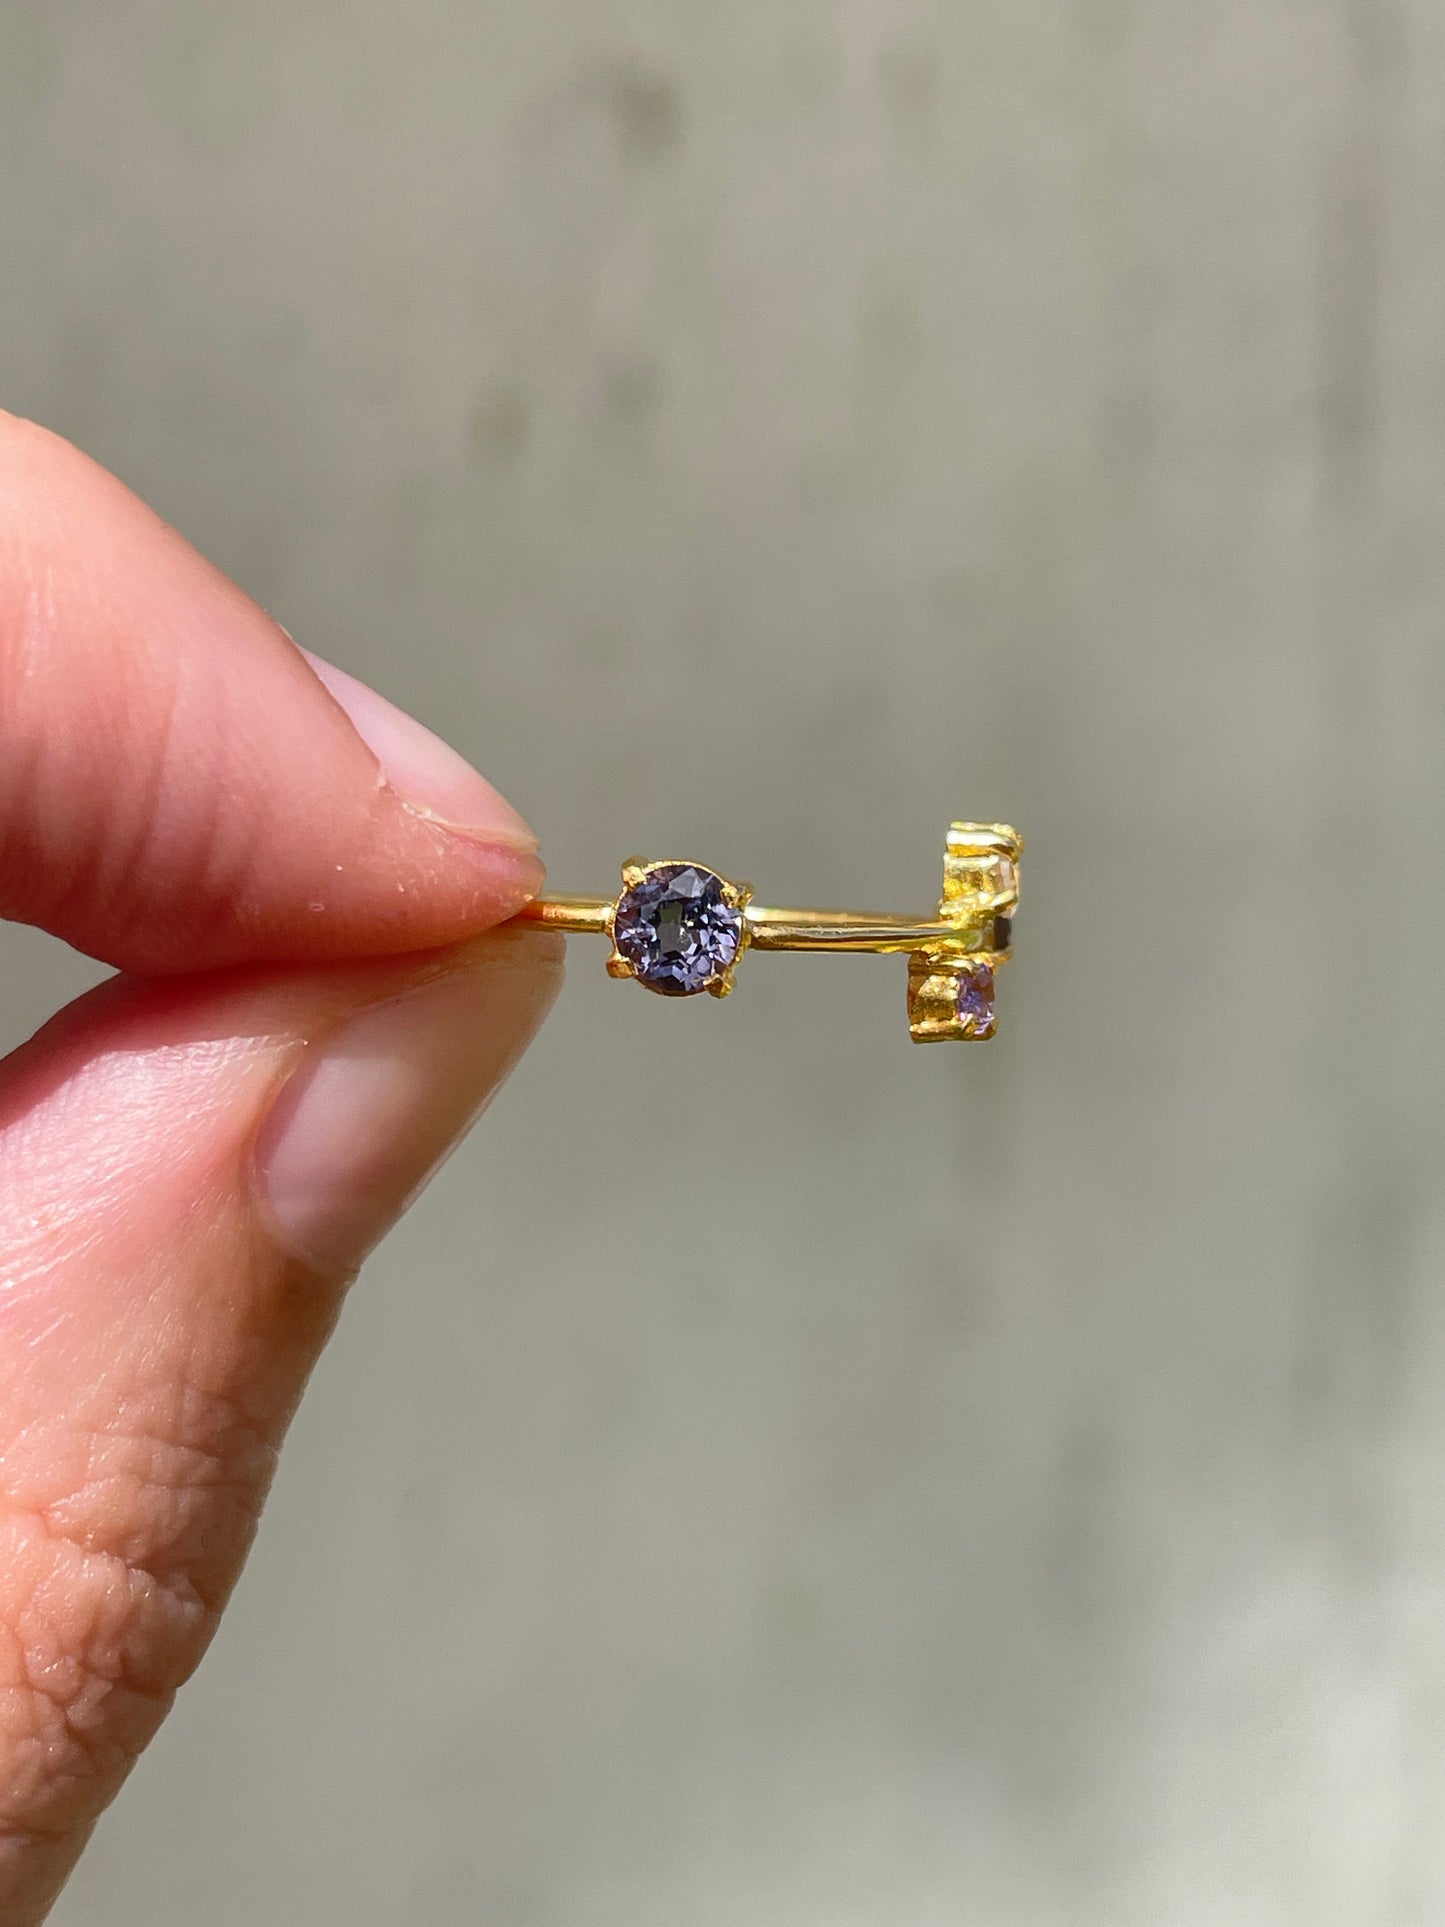 Galaxy Ring Gold with Violet Sapphires - size 8